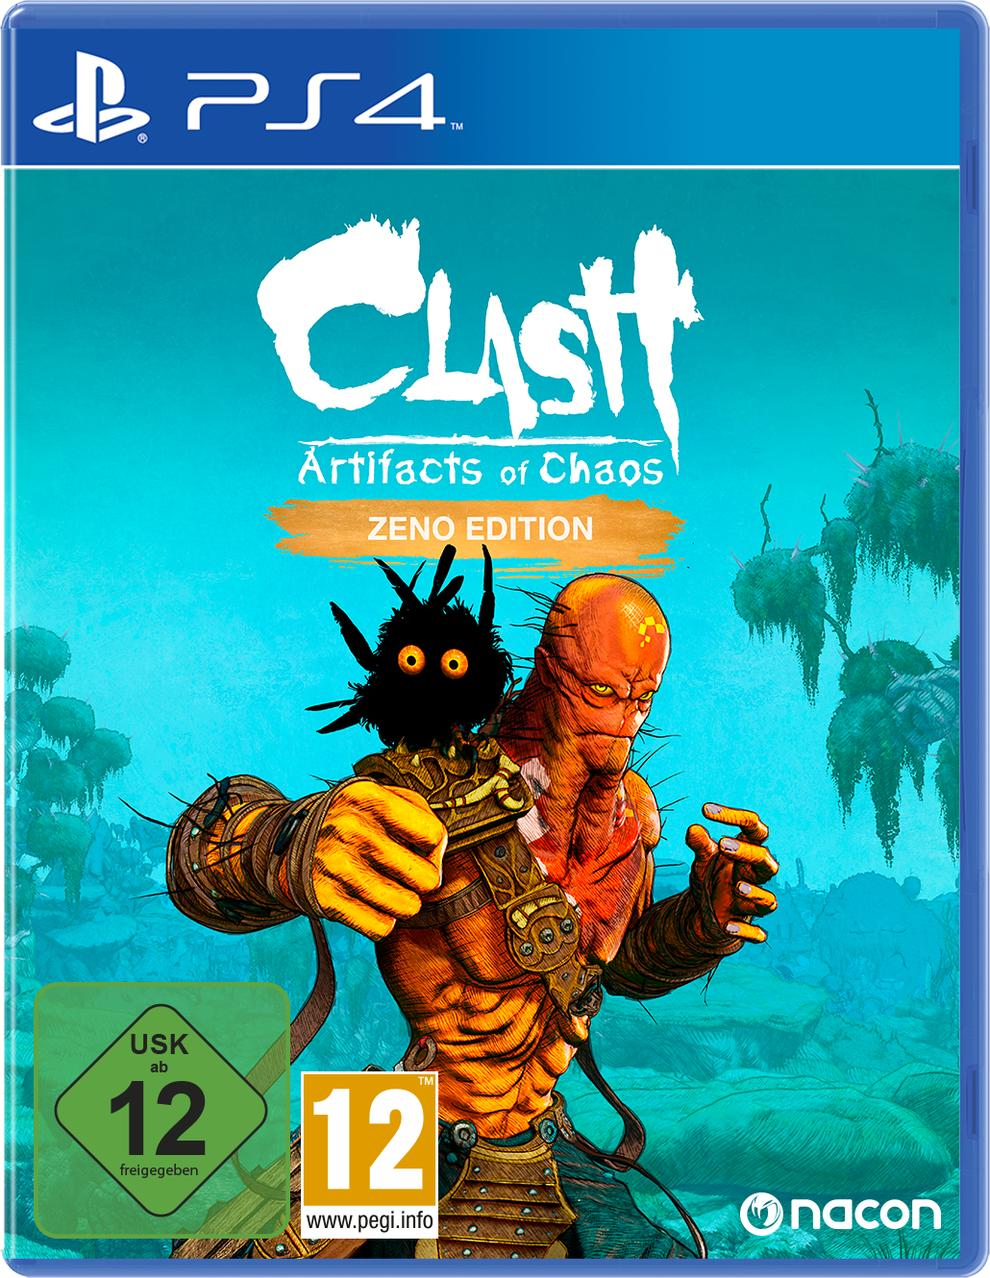 Chaos Artifacts Clash: of 4] - [PlayStation